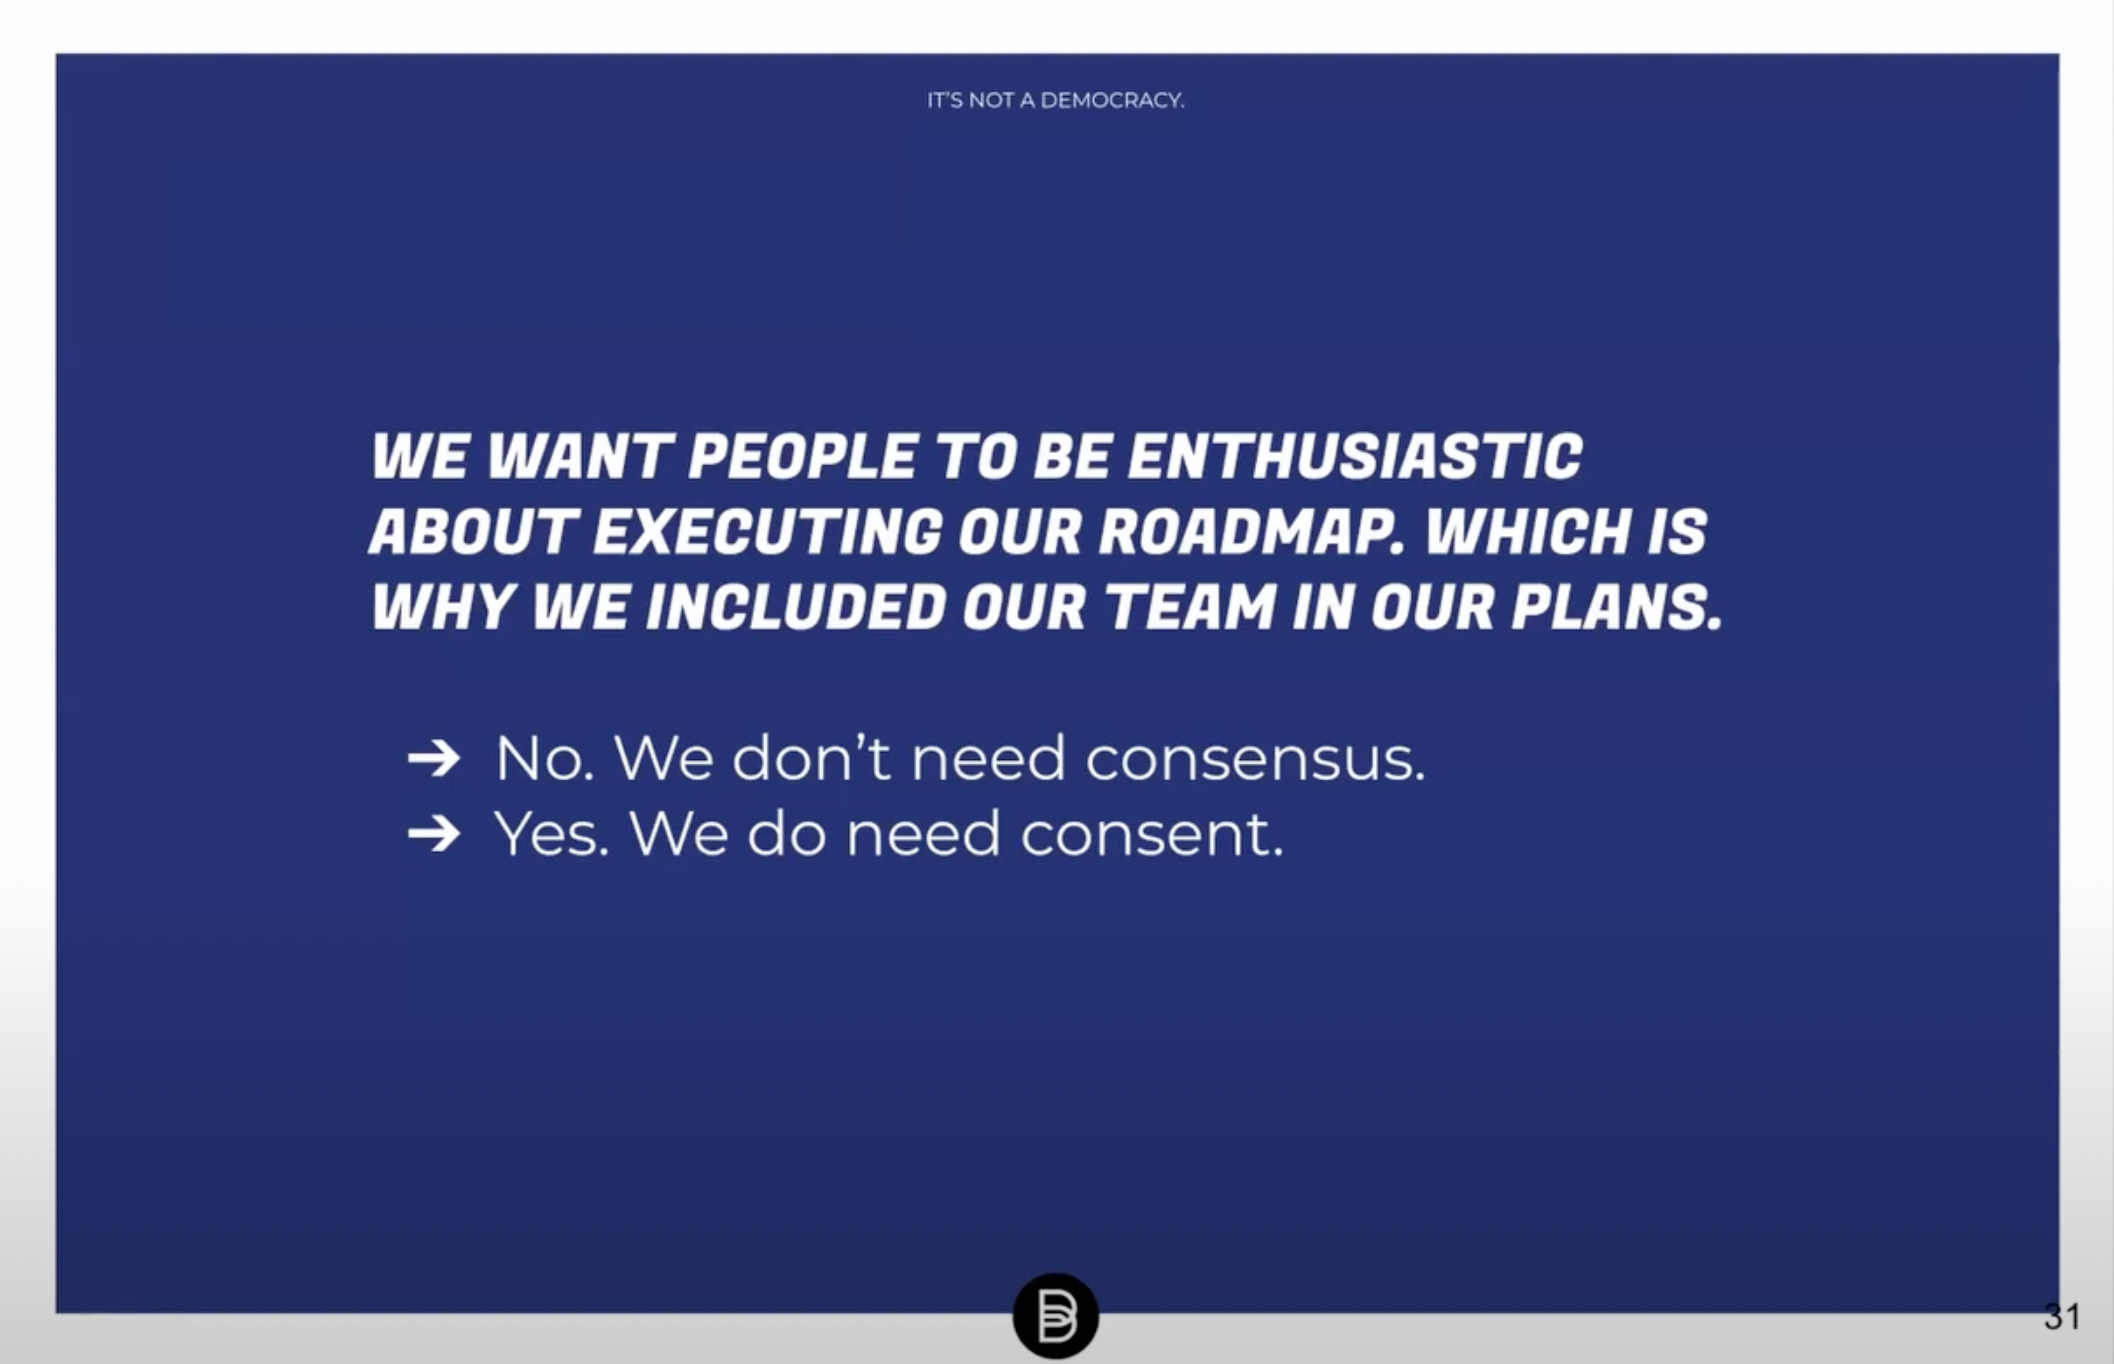 We want people to be enthusiastic about executing our roadmap which is why we included our team in our plans. No. We don't need consensus. Yes. We do need consent.